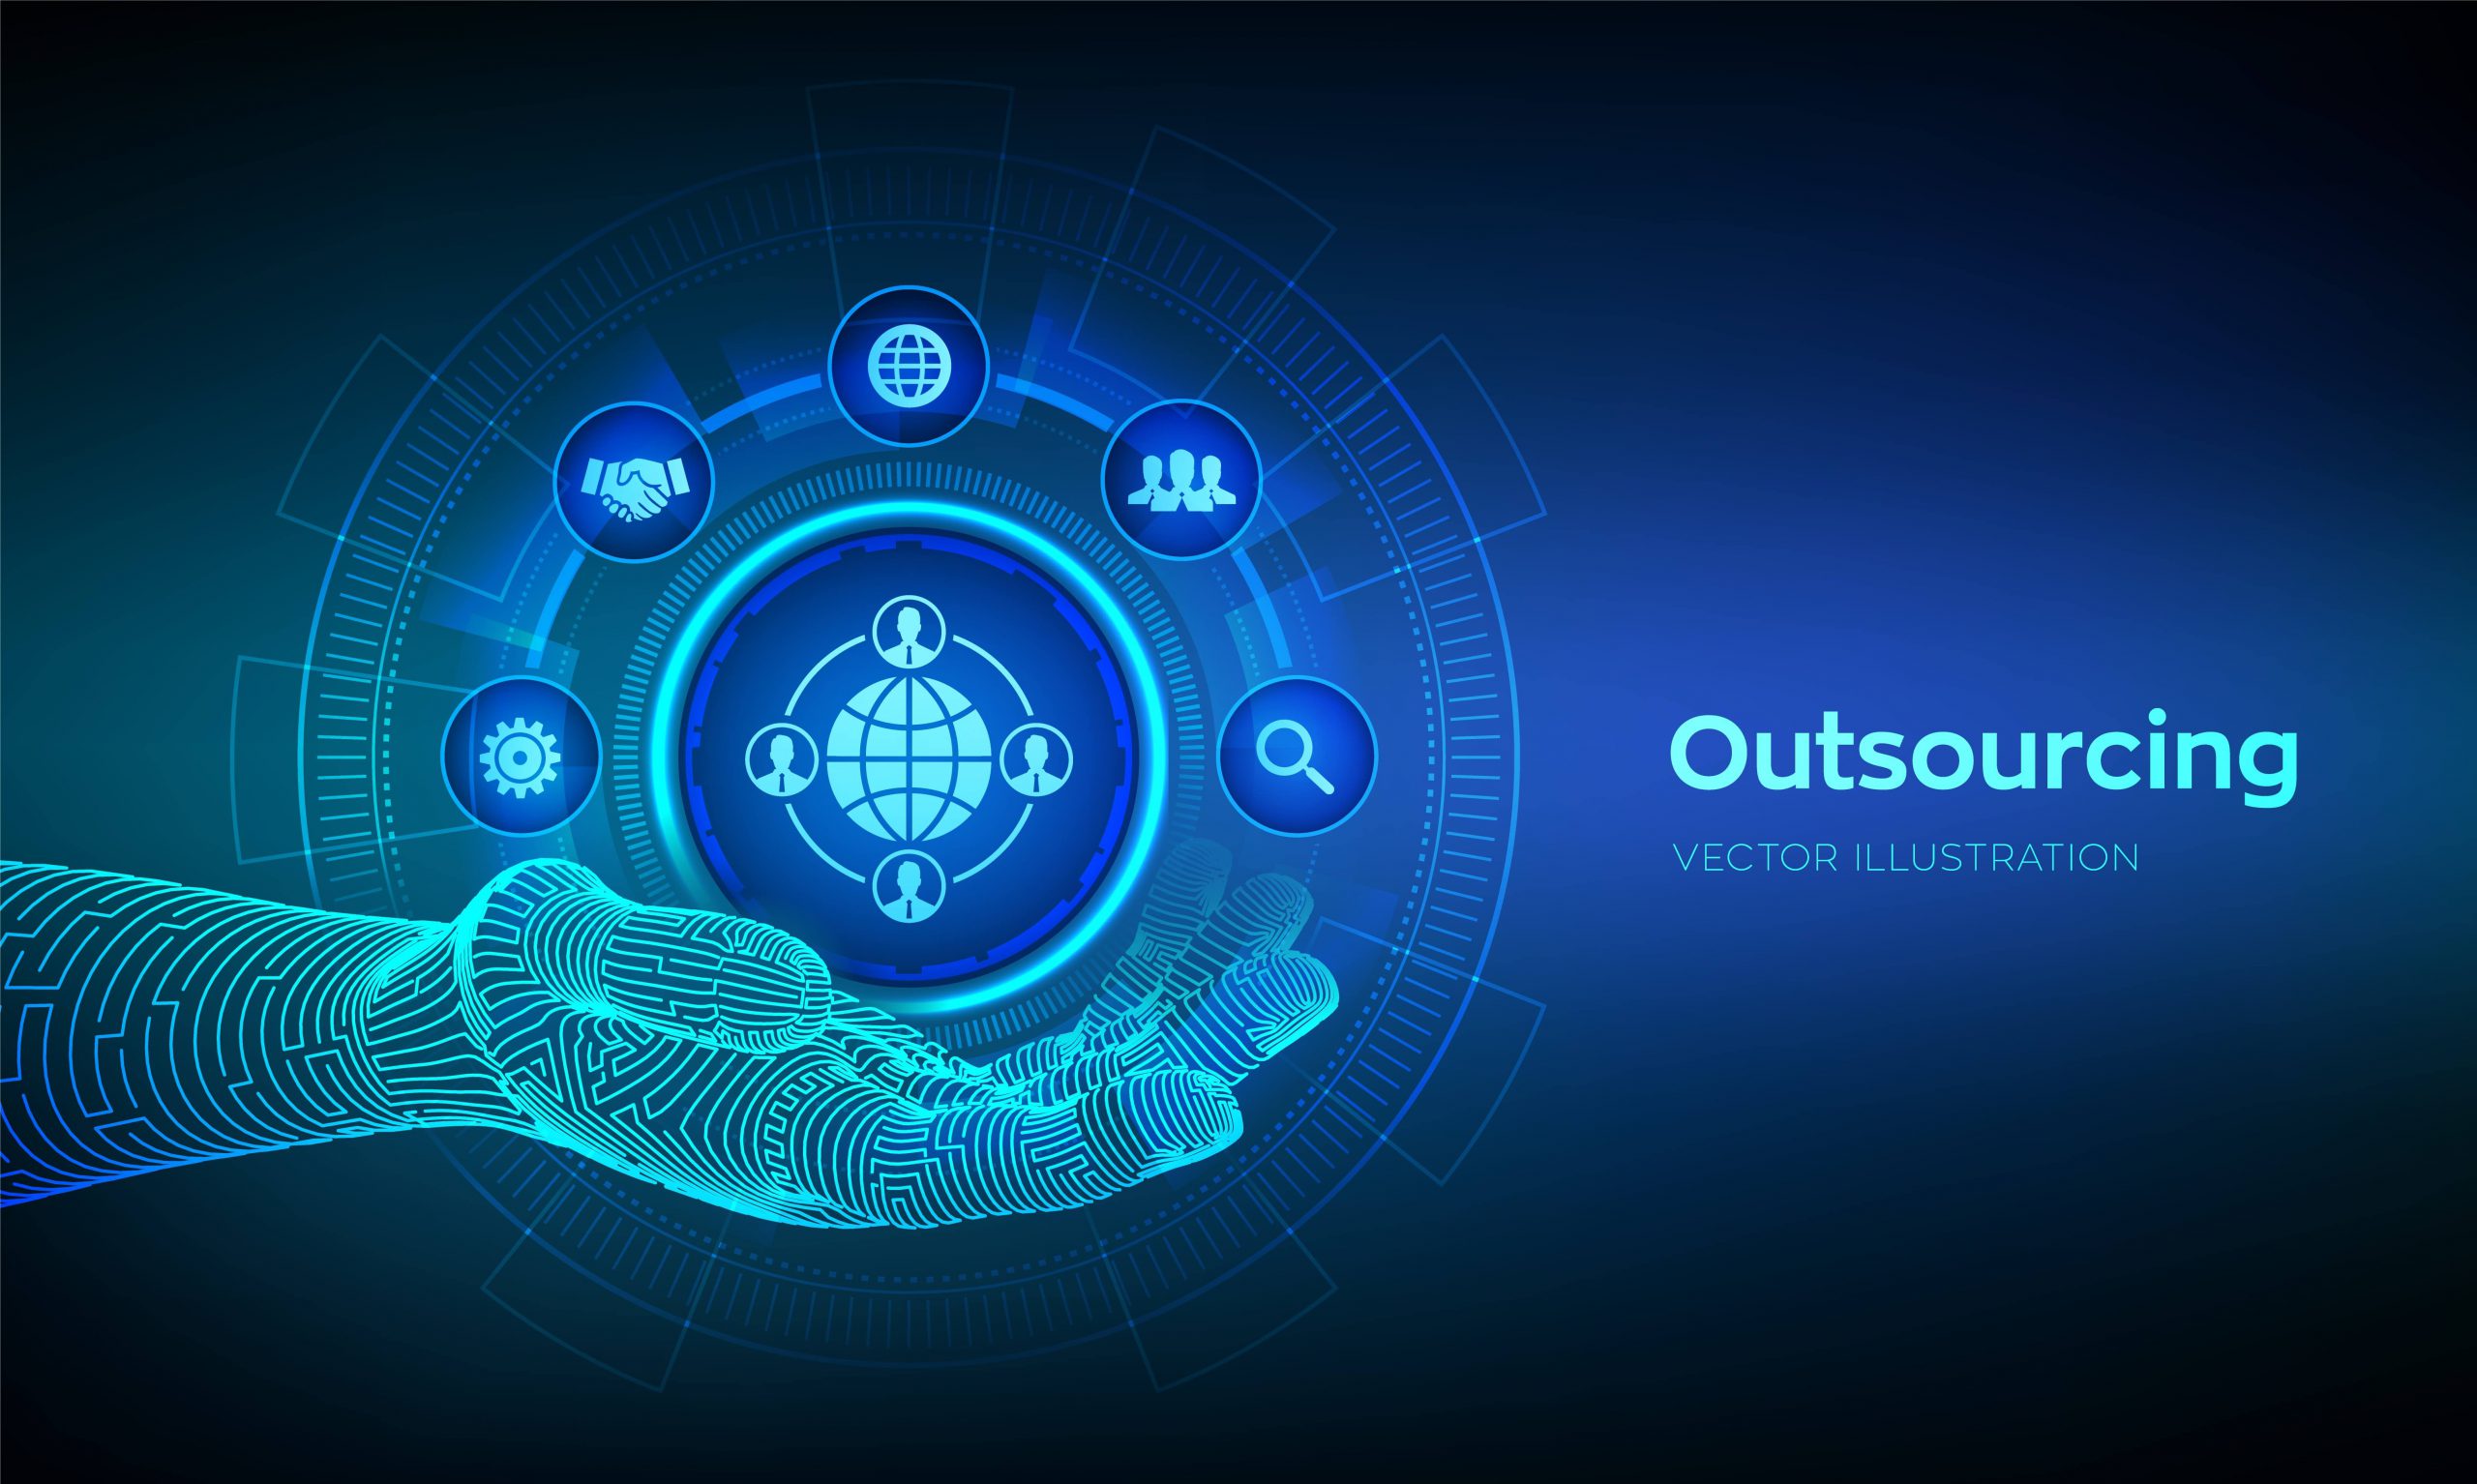 The image depicts outsourcing with artifical intellegence. Depicting AI-based payroll outsourcing service.